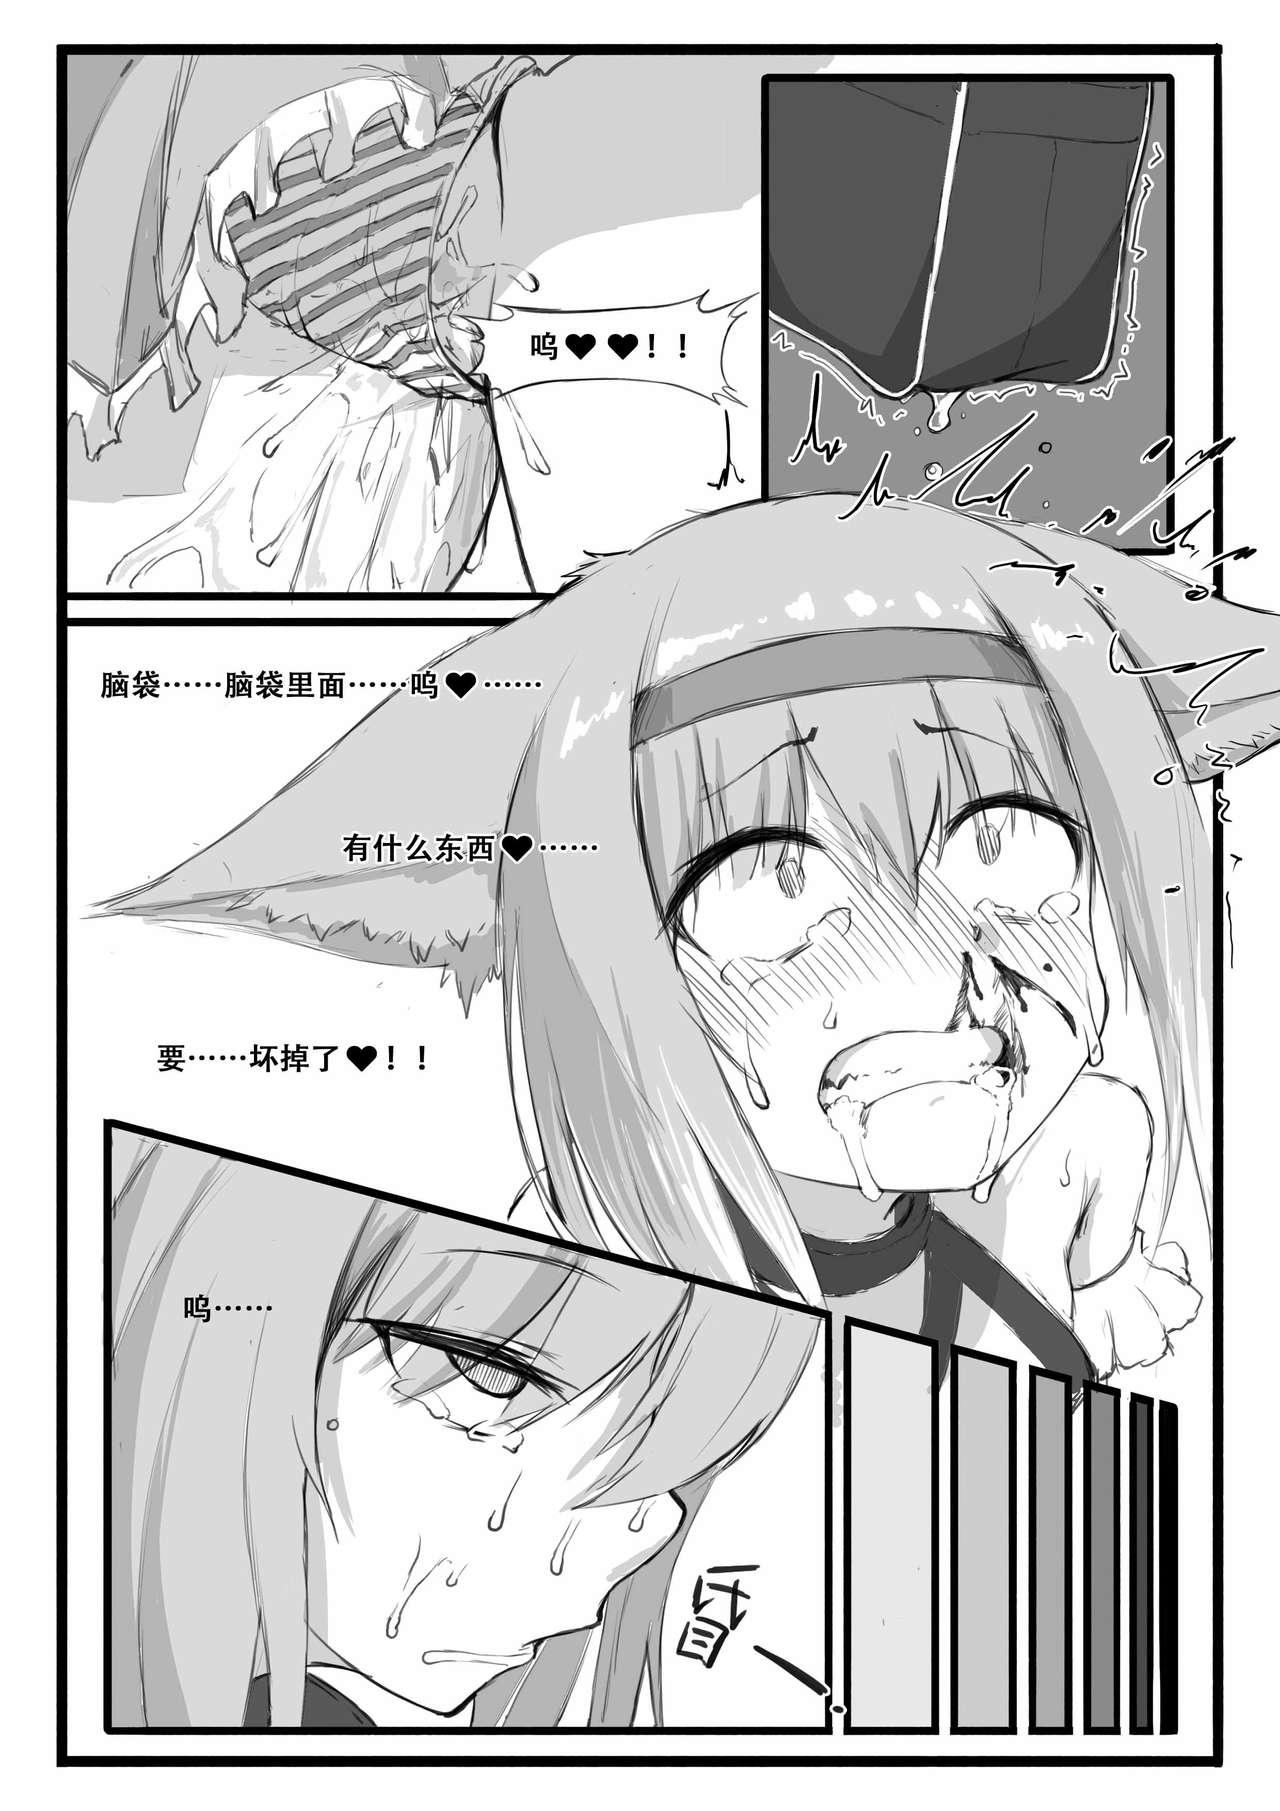 Whores 铃兰的单人任务 - Arknights Piroca - Page 12